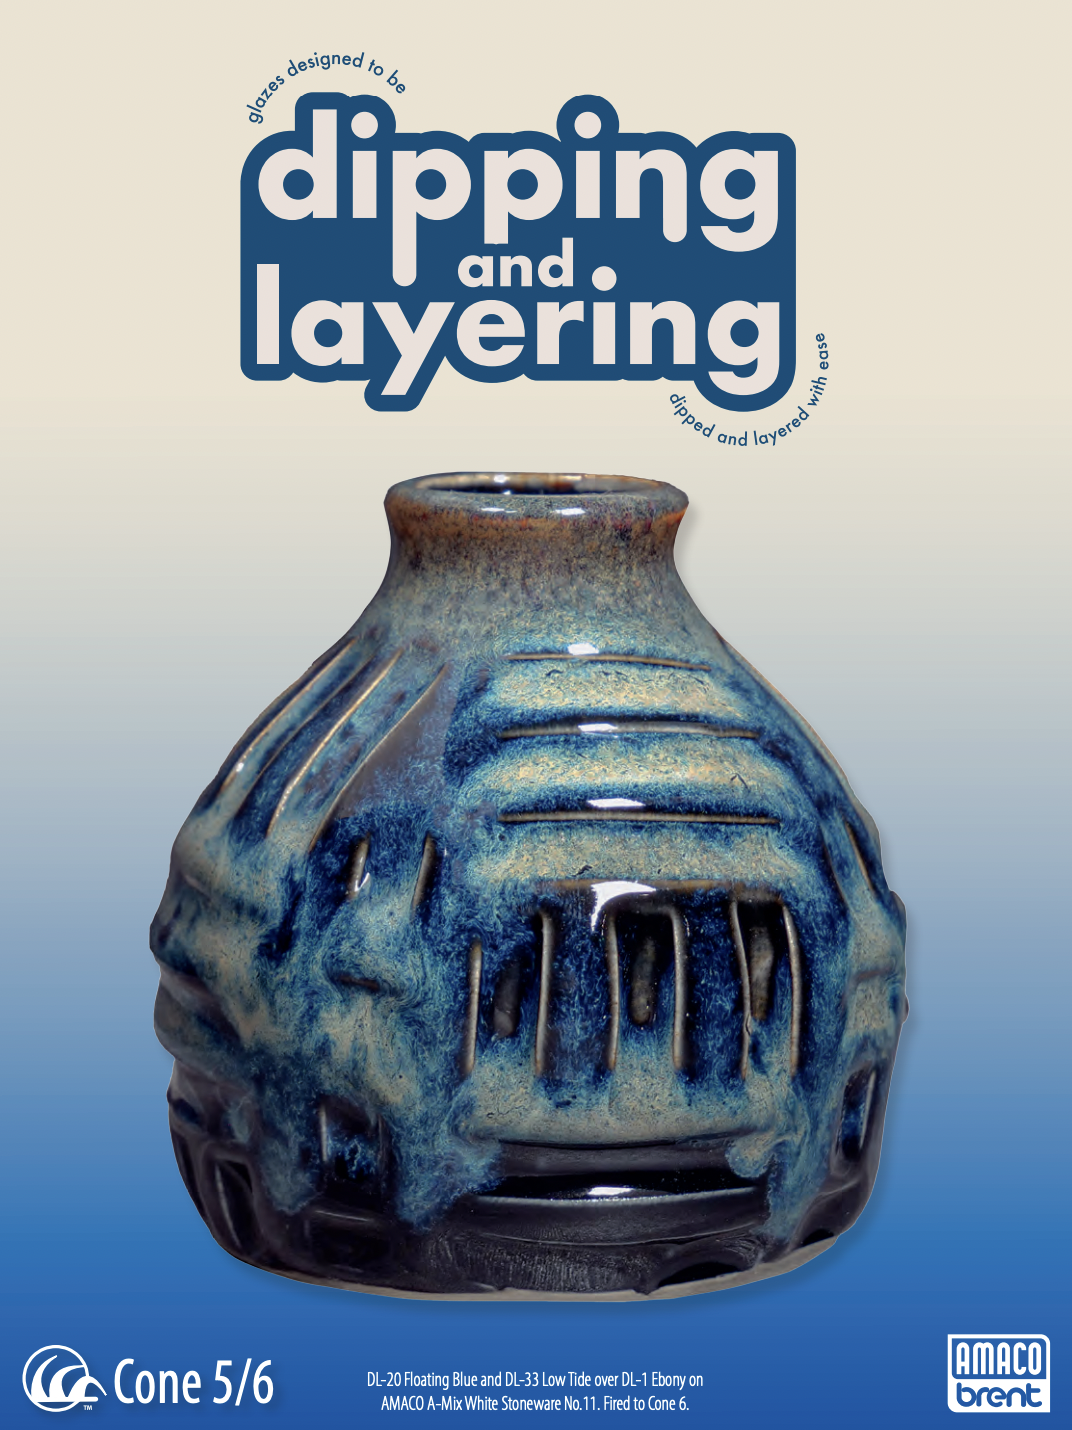 Let's Mix and Apply AMACO's New Dipping & Layering Glazes!